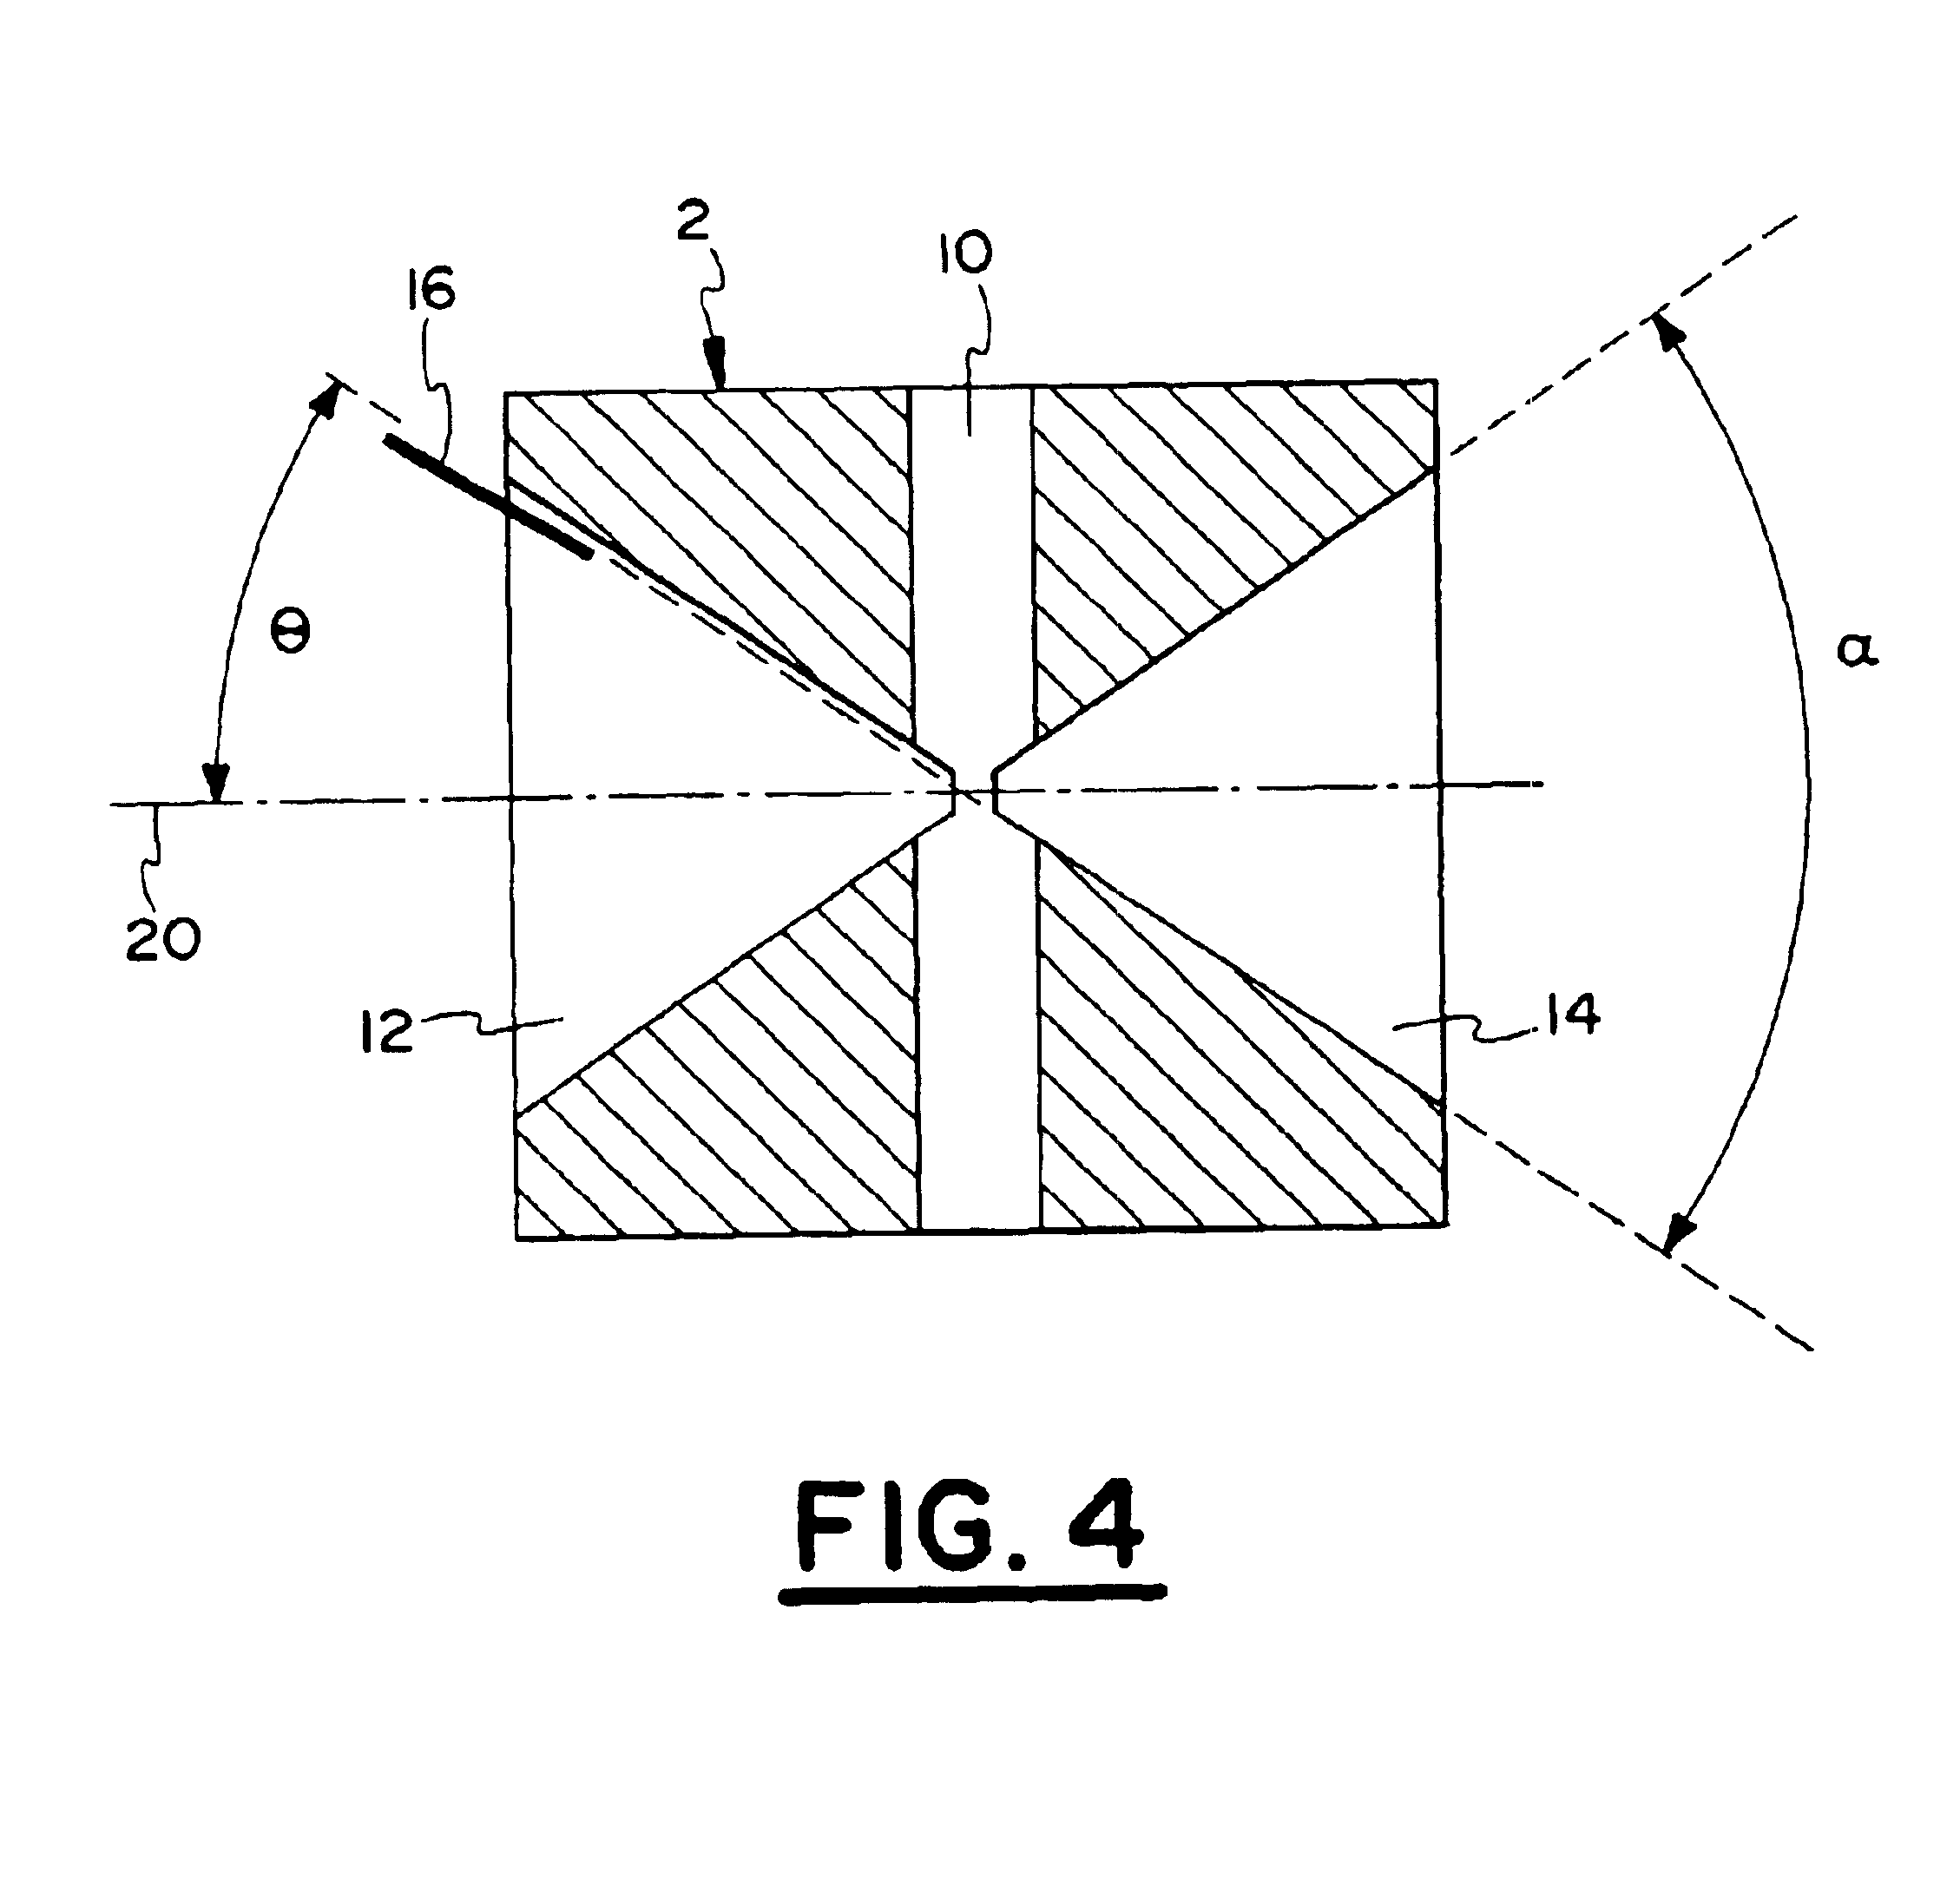 Apparatus and process for analyzing a stream of fluid